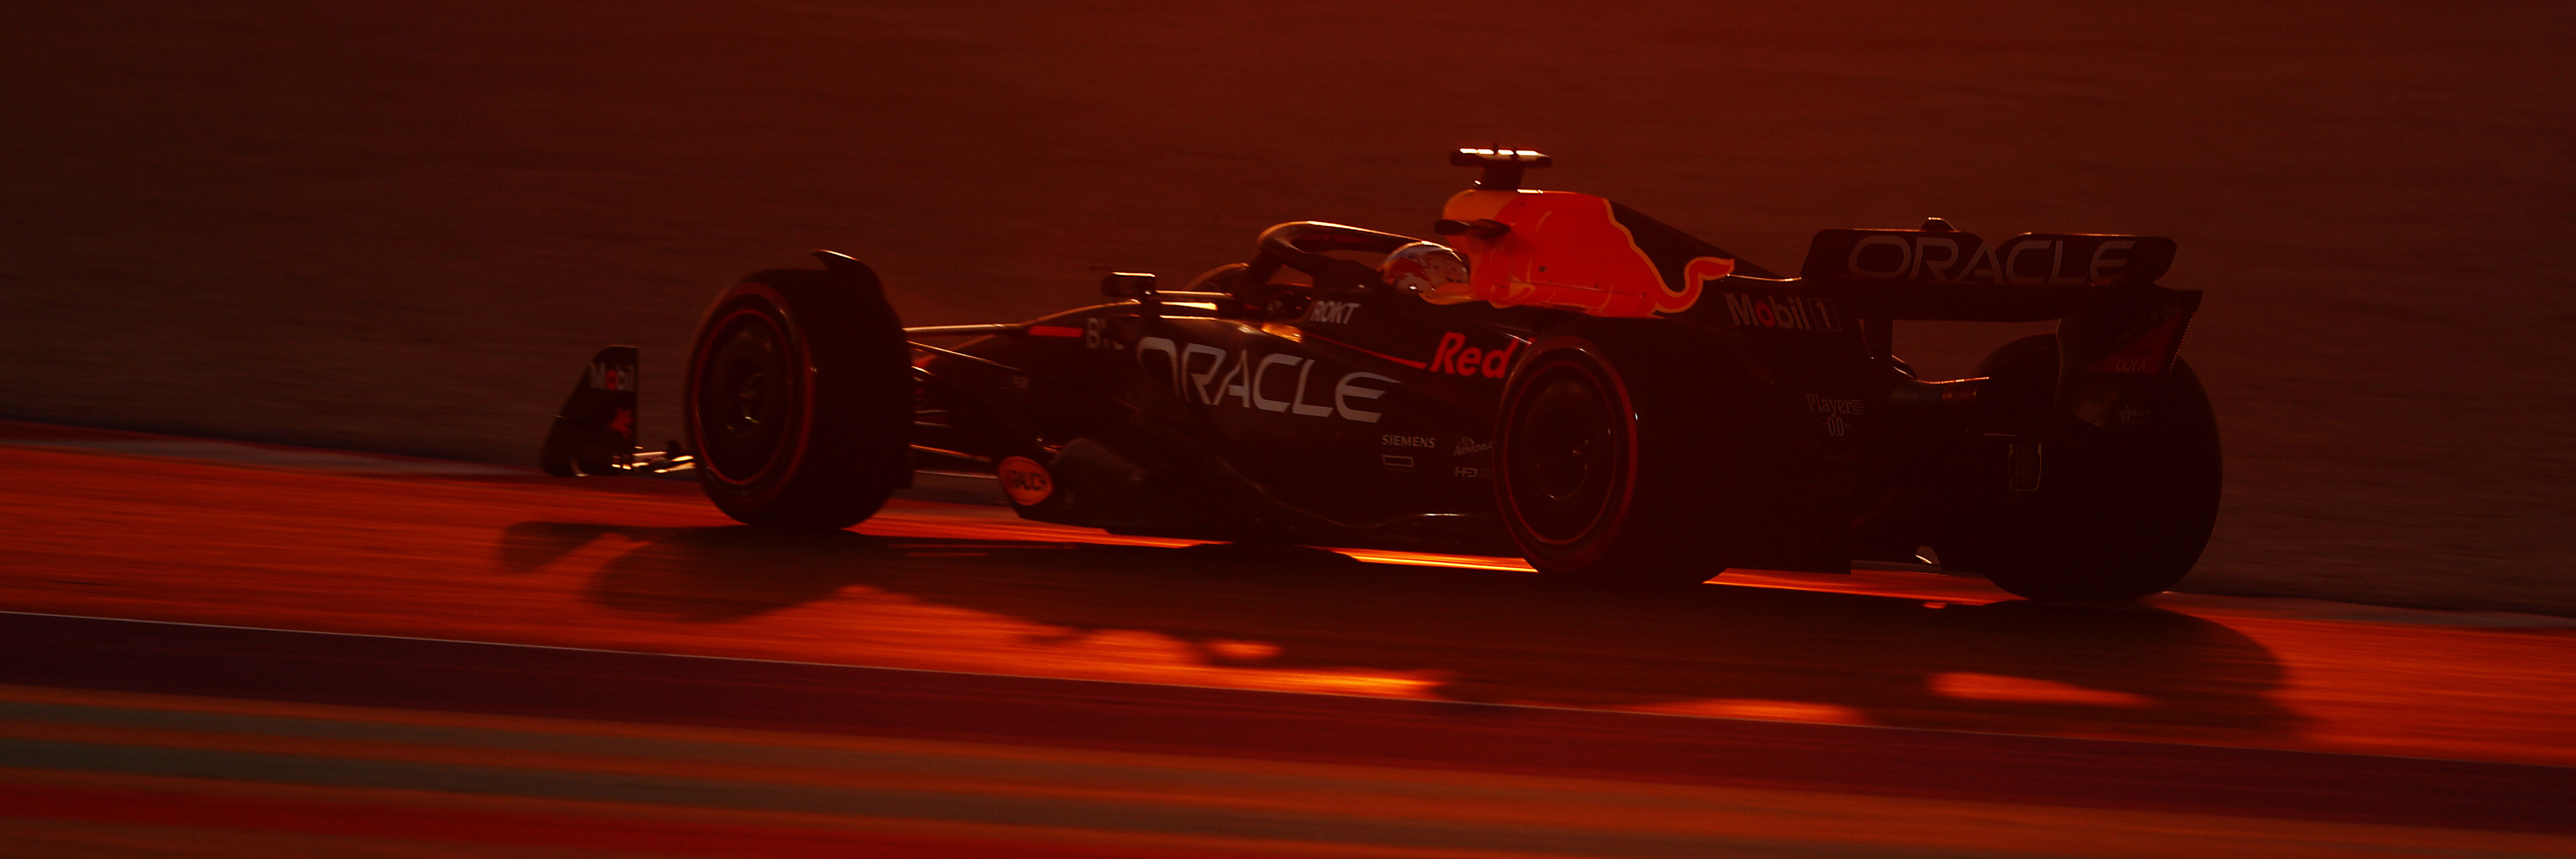 Max Verstappen on track for practice at the Qatar Grand Prix